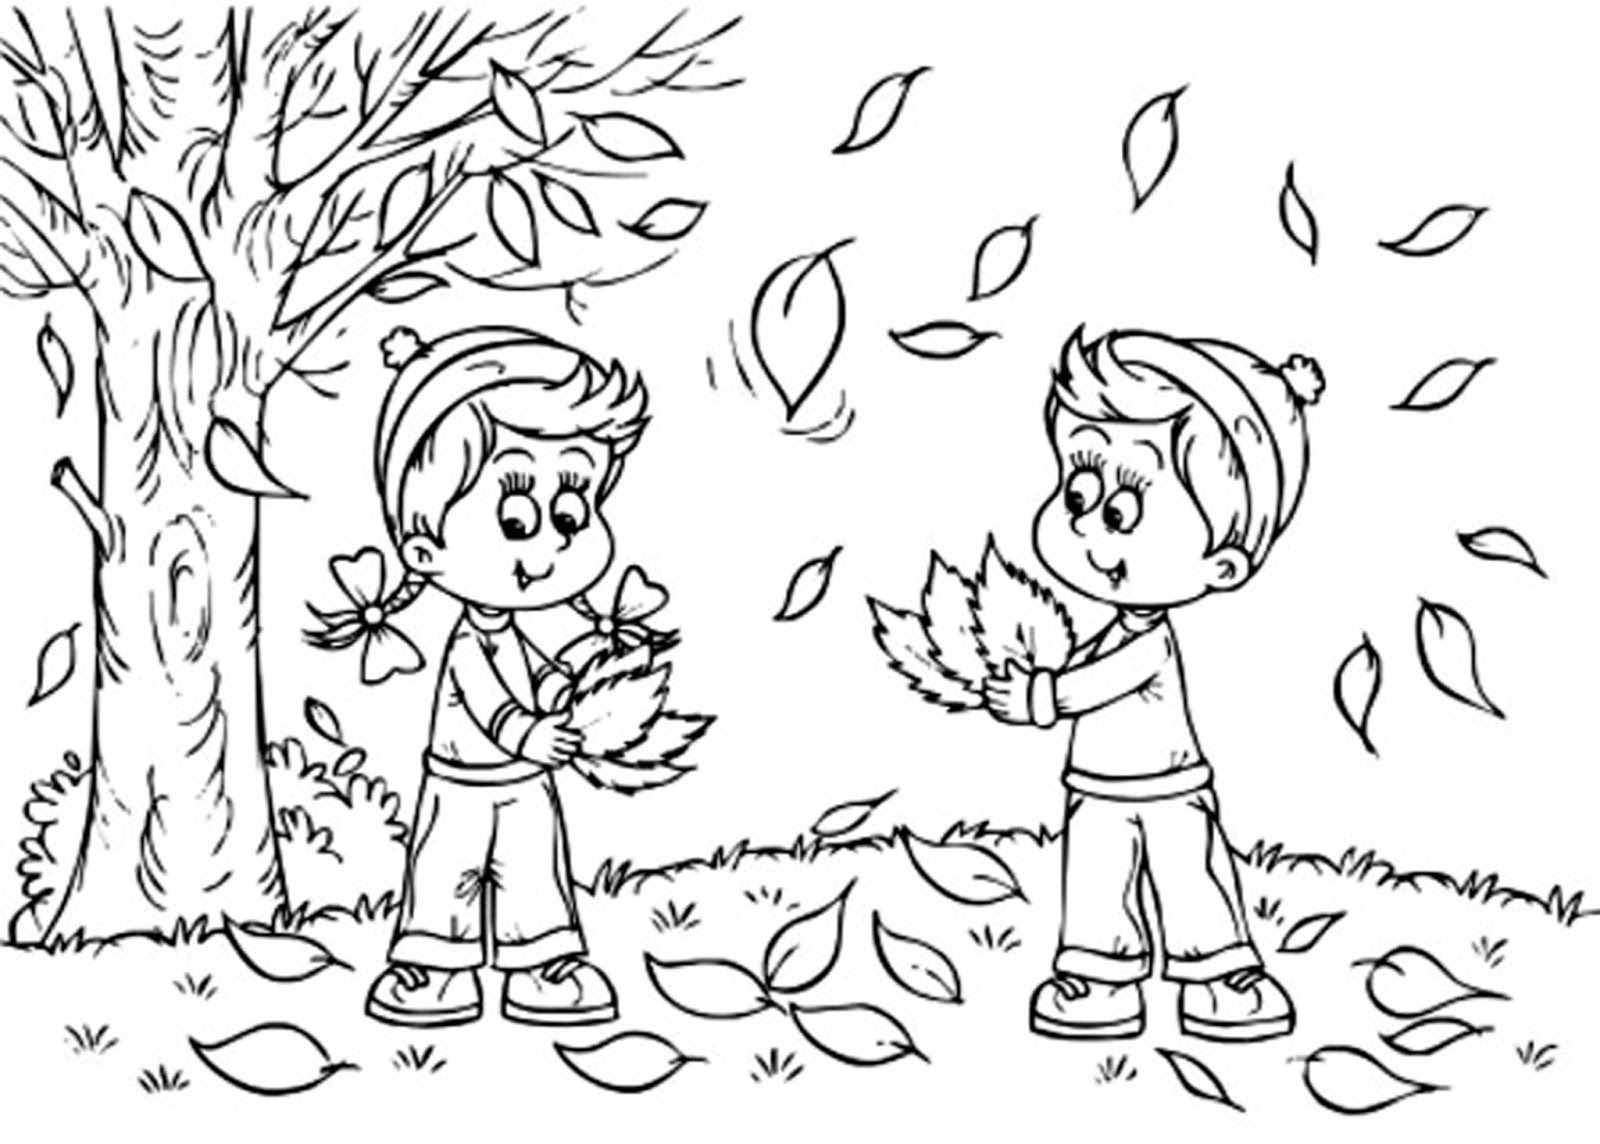 Coloring Pages Autumn Season Fall Season Drawings At Paintingvalley Explore Collection Of